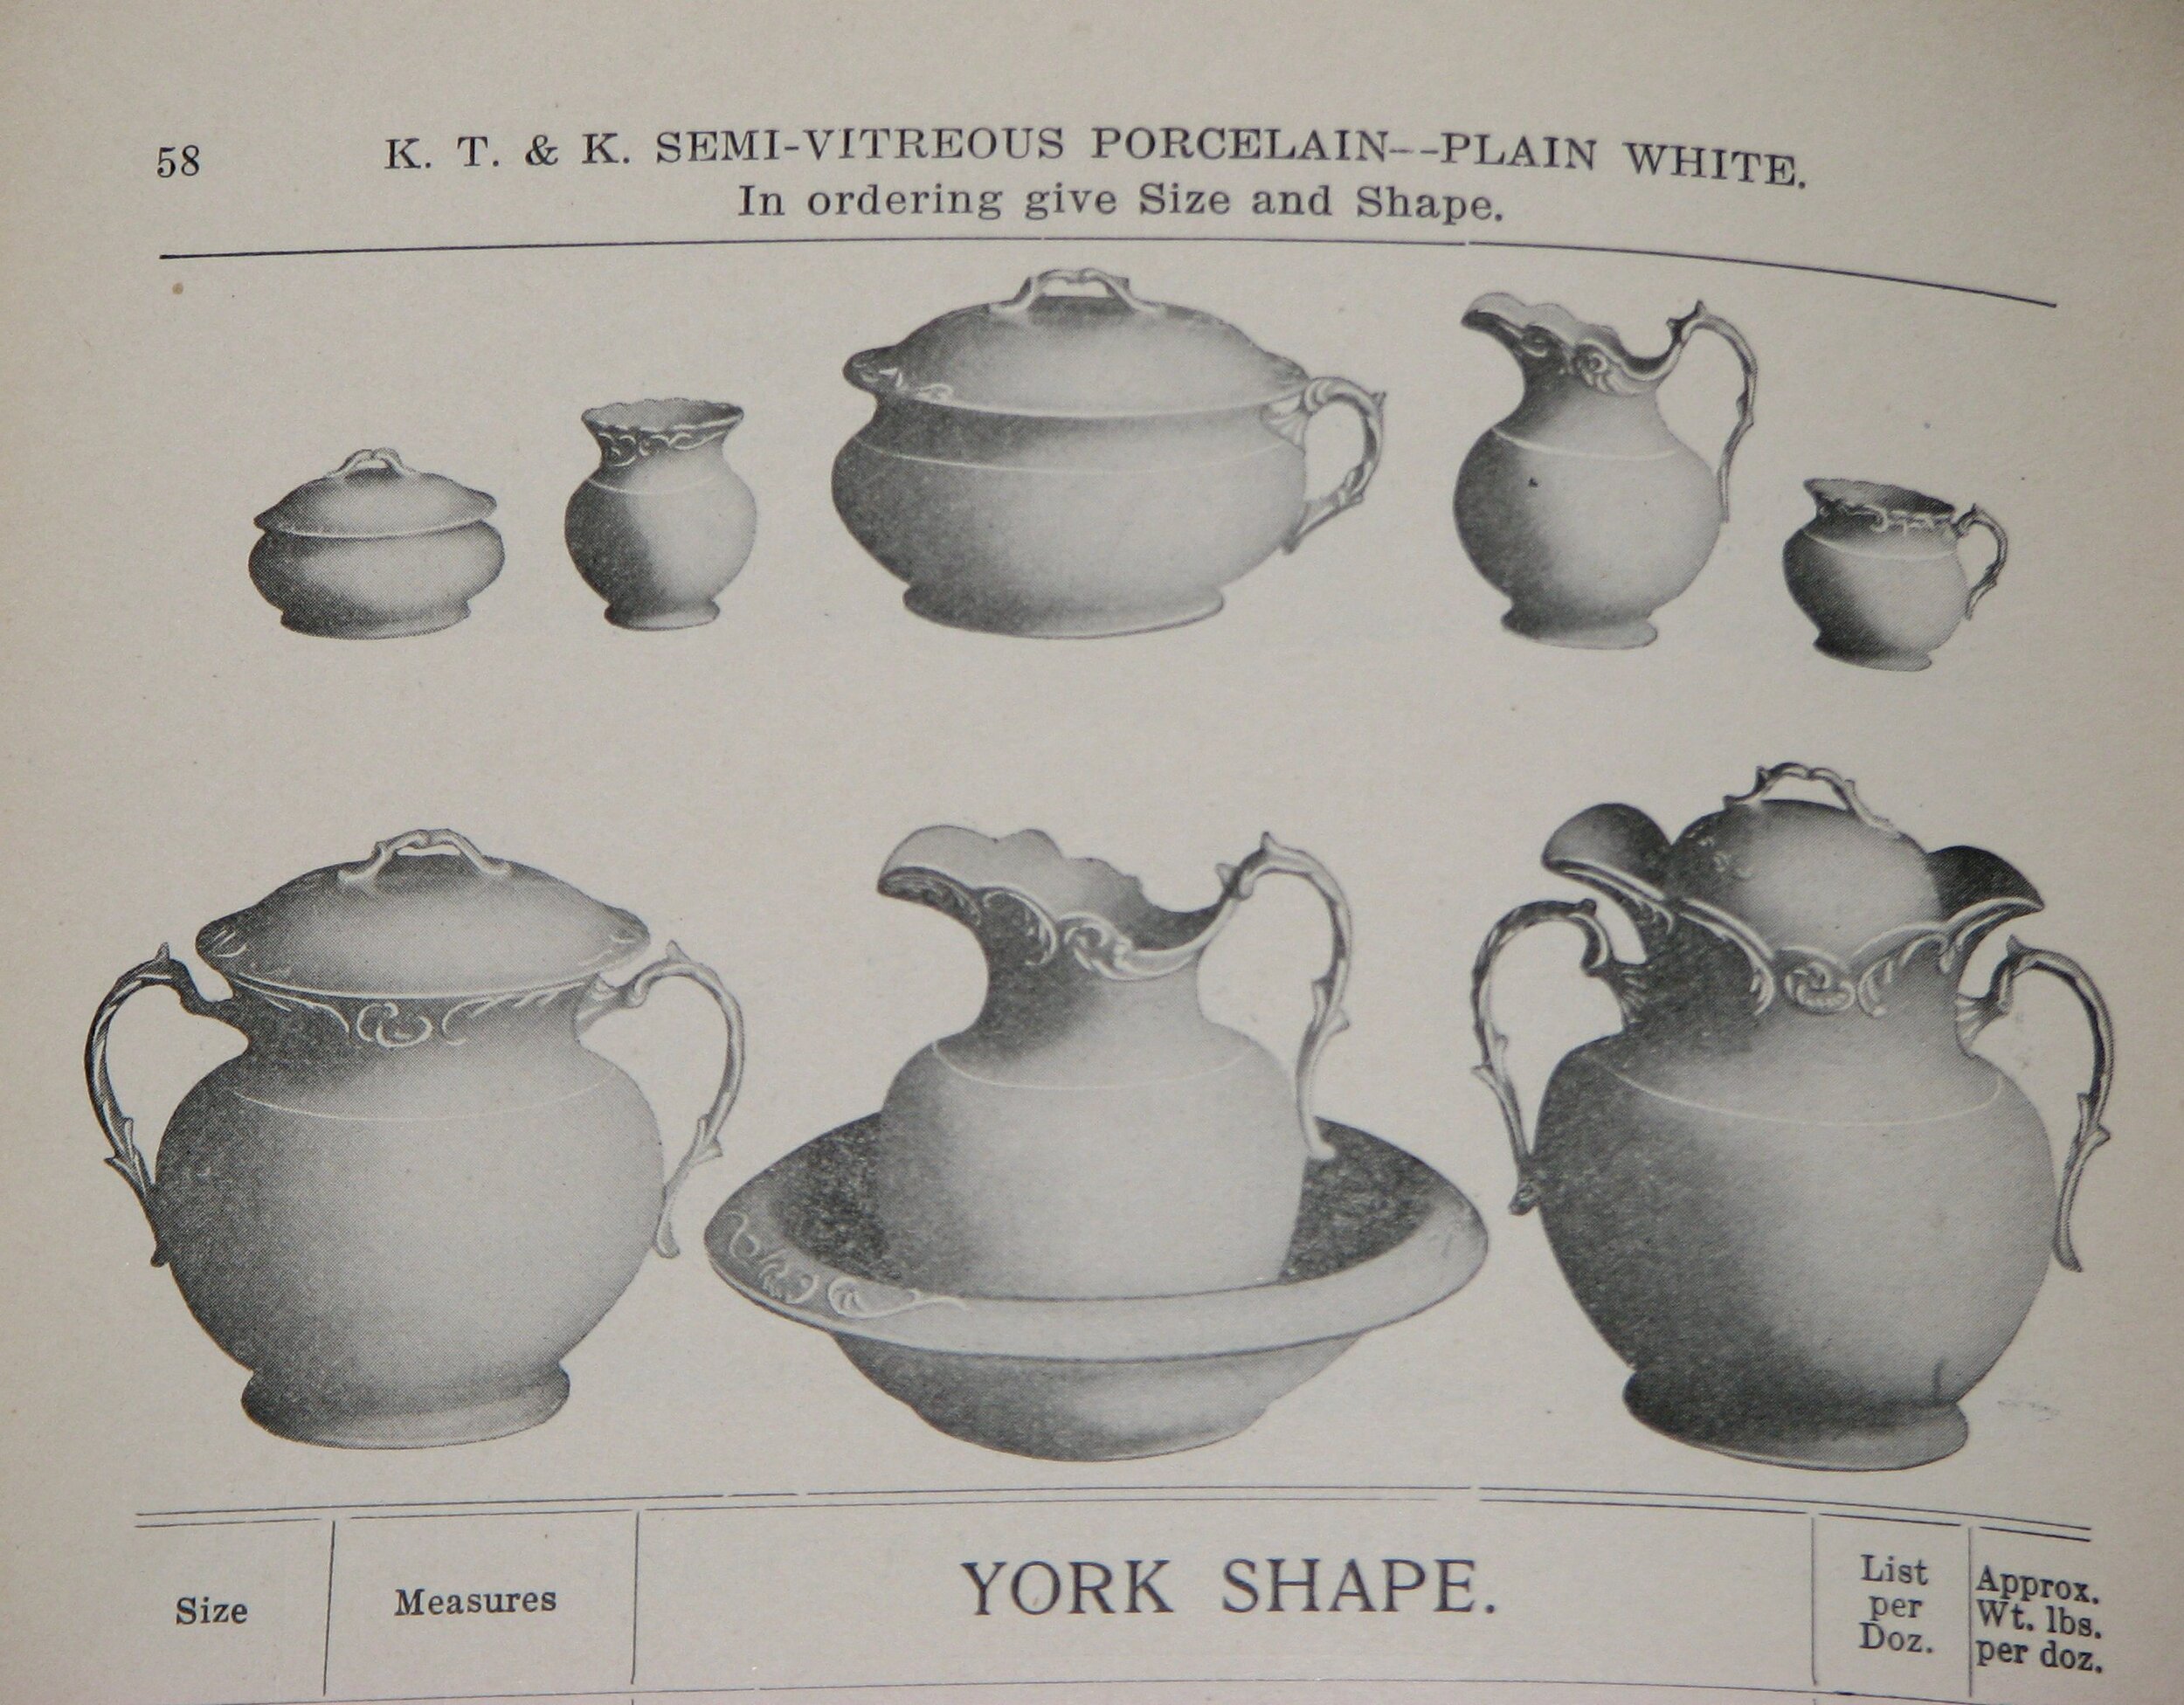 K.T.&amp;K. Catalog Page, Museum of Ceramics Archives